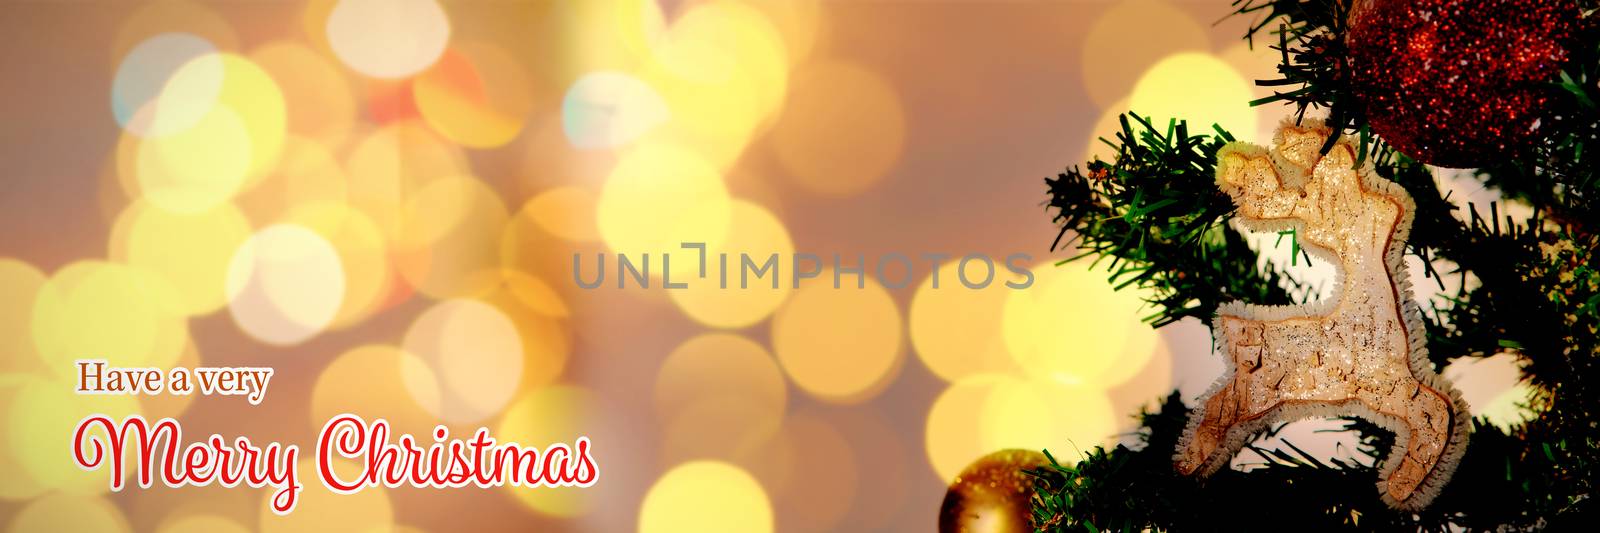 Composite image of christmas card by Wavebreakmedia